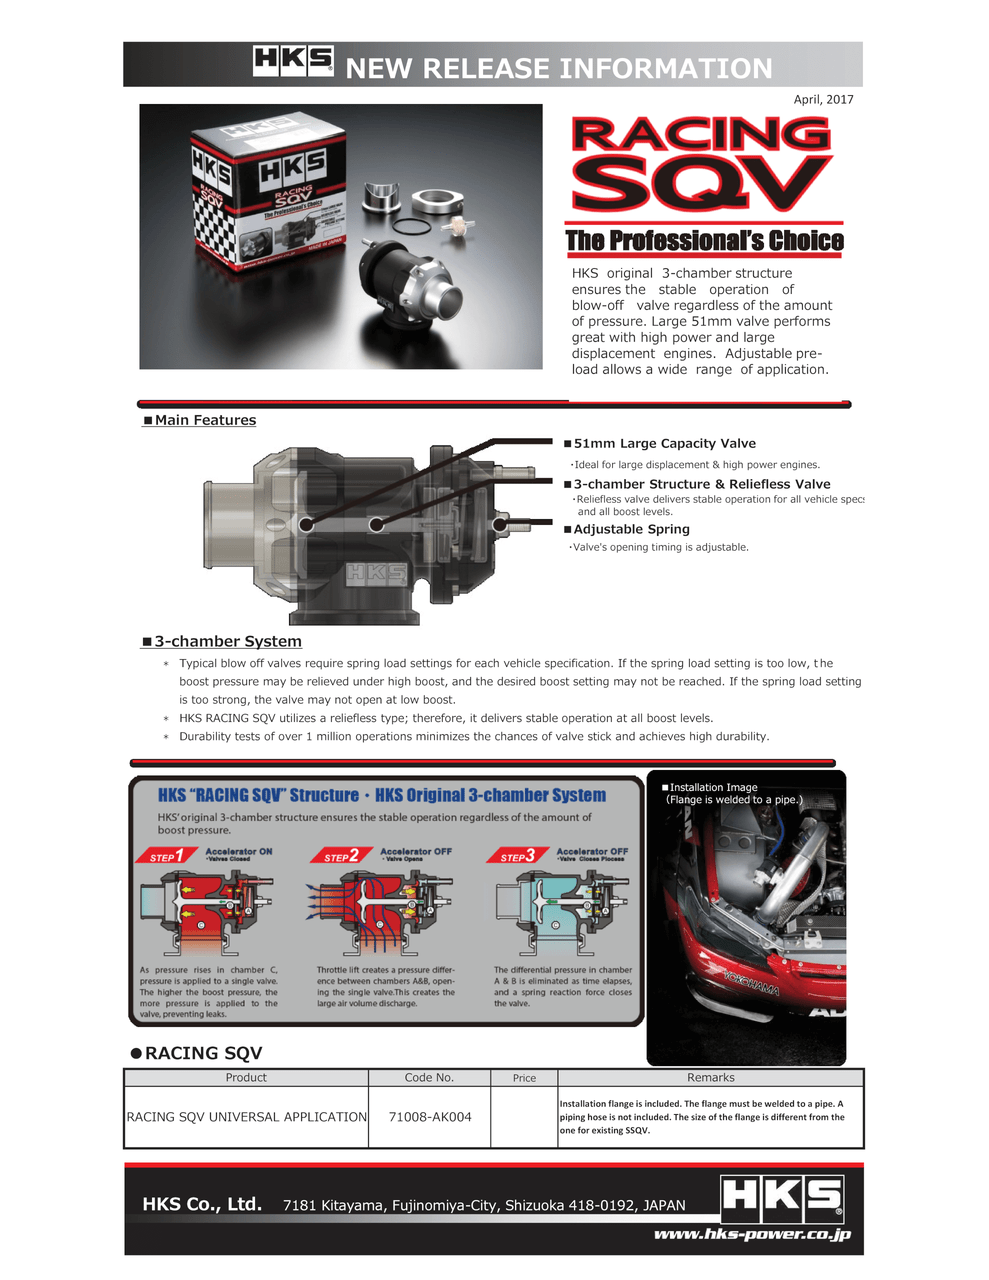 Racing SQV; Installation Flange Is Included